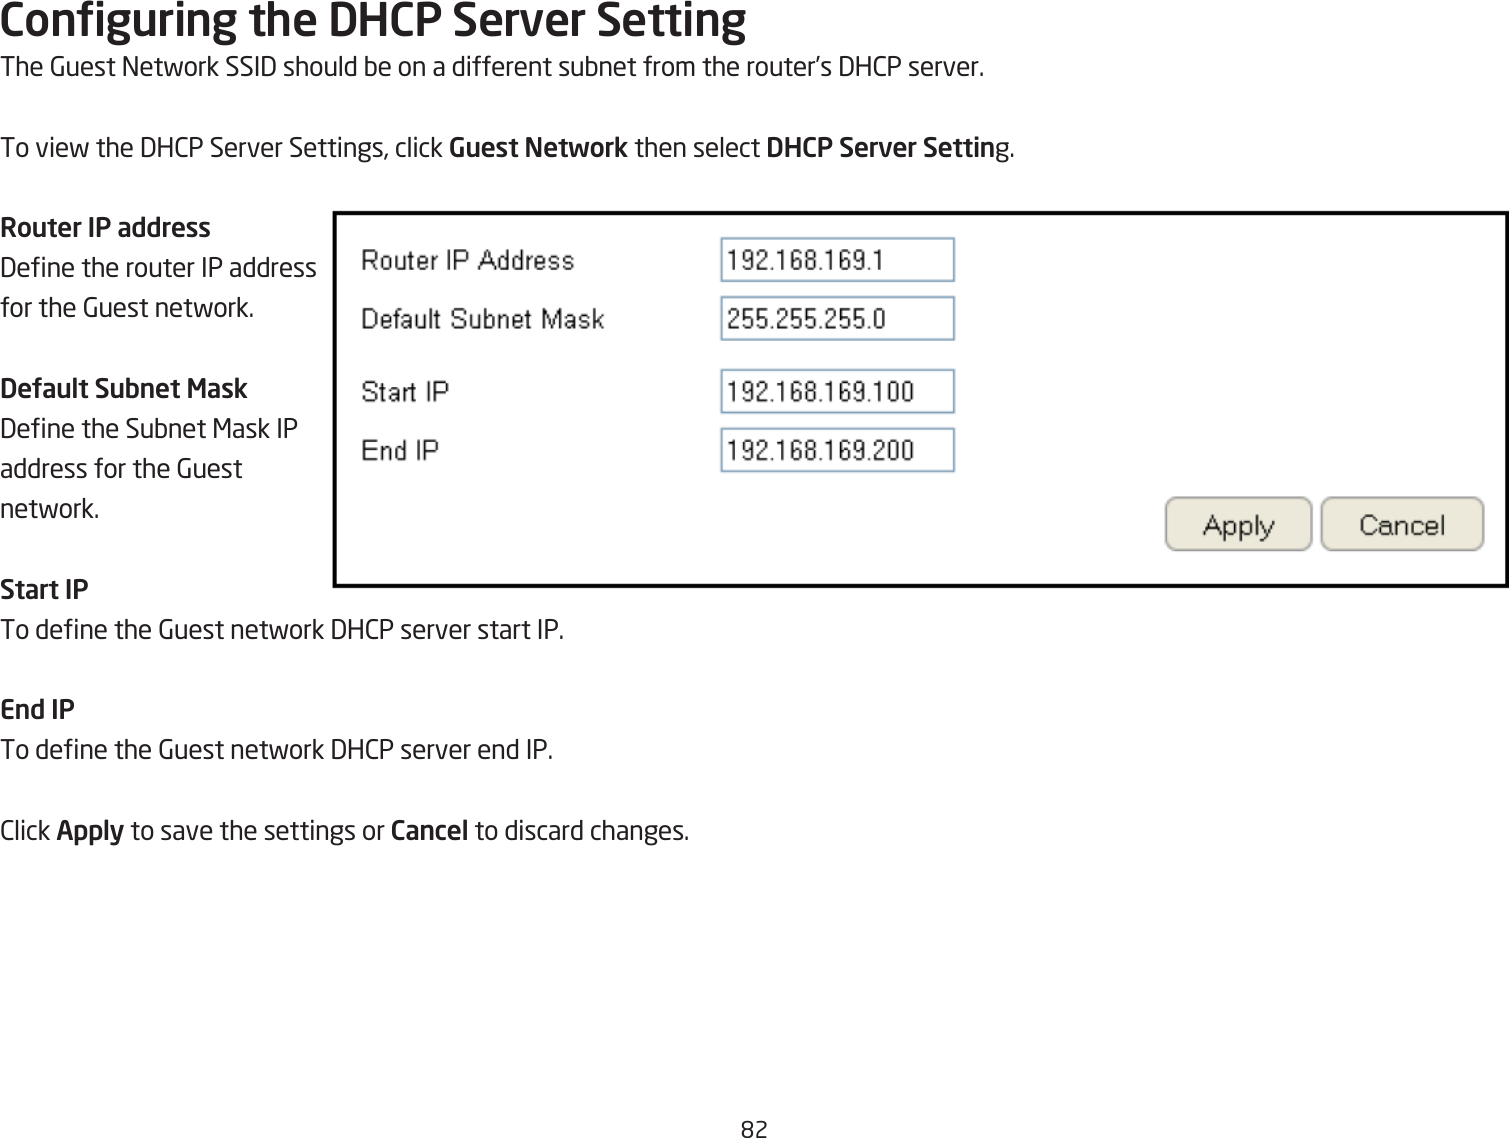 &apos;2Conguring the DHCP Server SettingThe 6uest =etfork SSI3 should Qe on a different suQnet from the router’s 3H2P server.To vief the 3H2P Server Settings, click Guest Network then select DHCP Server Setting.Router IP address3ene the router IP address for the 6uest netfork.DeUault Subnet Mask3ene the SuQnet &lt;ask IP address for the 6uest netfork.Start IPTo dene the 6uest netfork 3H2P server start IP.End IPTo dene the 6uest netfork 3H2P server end IP.2lick Apply to save the settings or Cancel to discard changes.